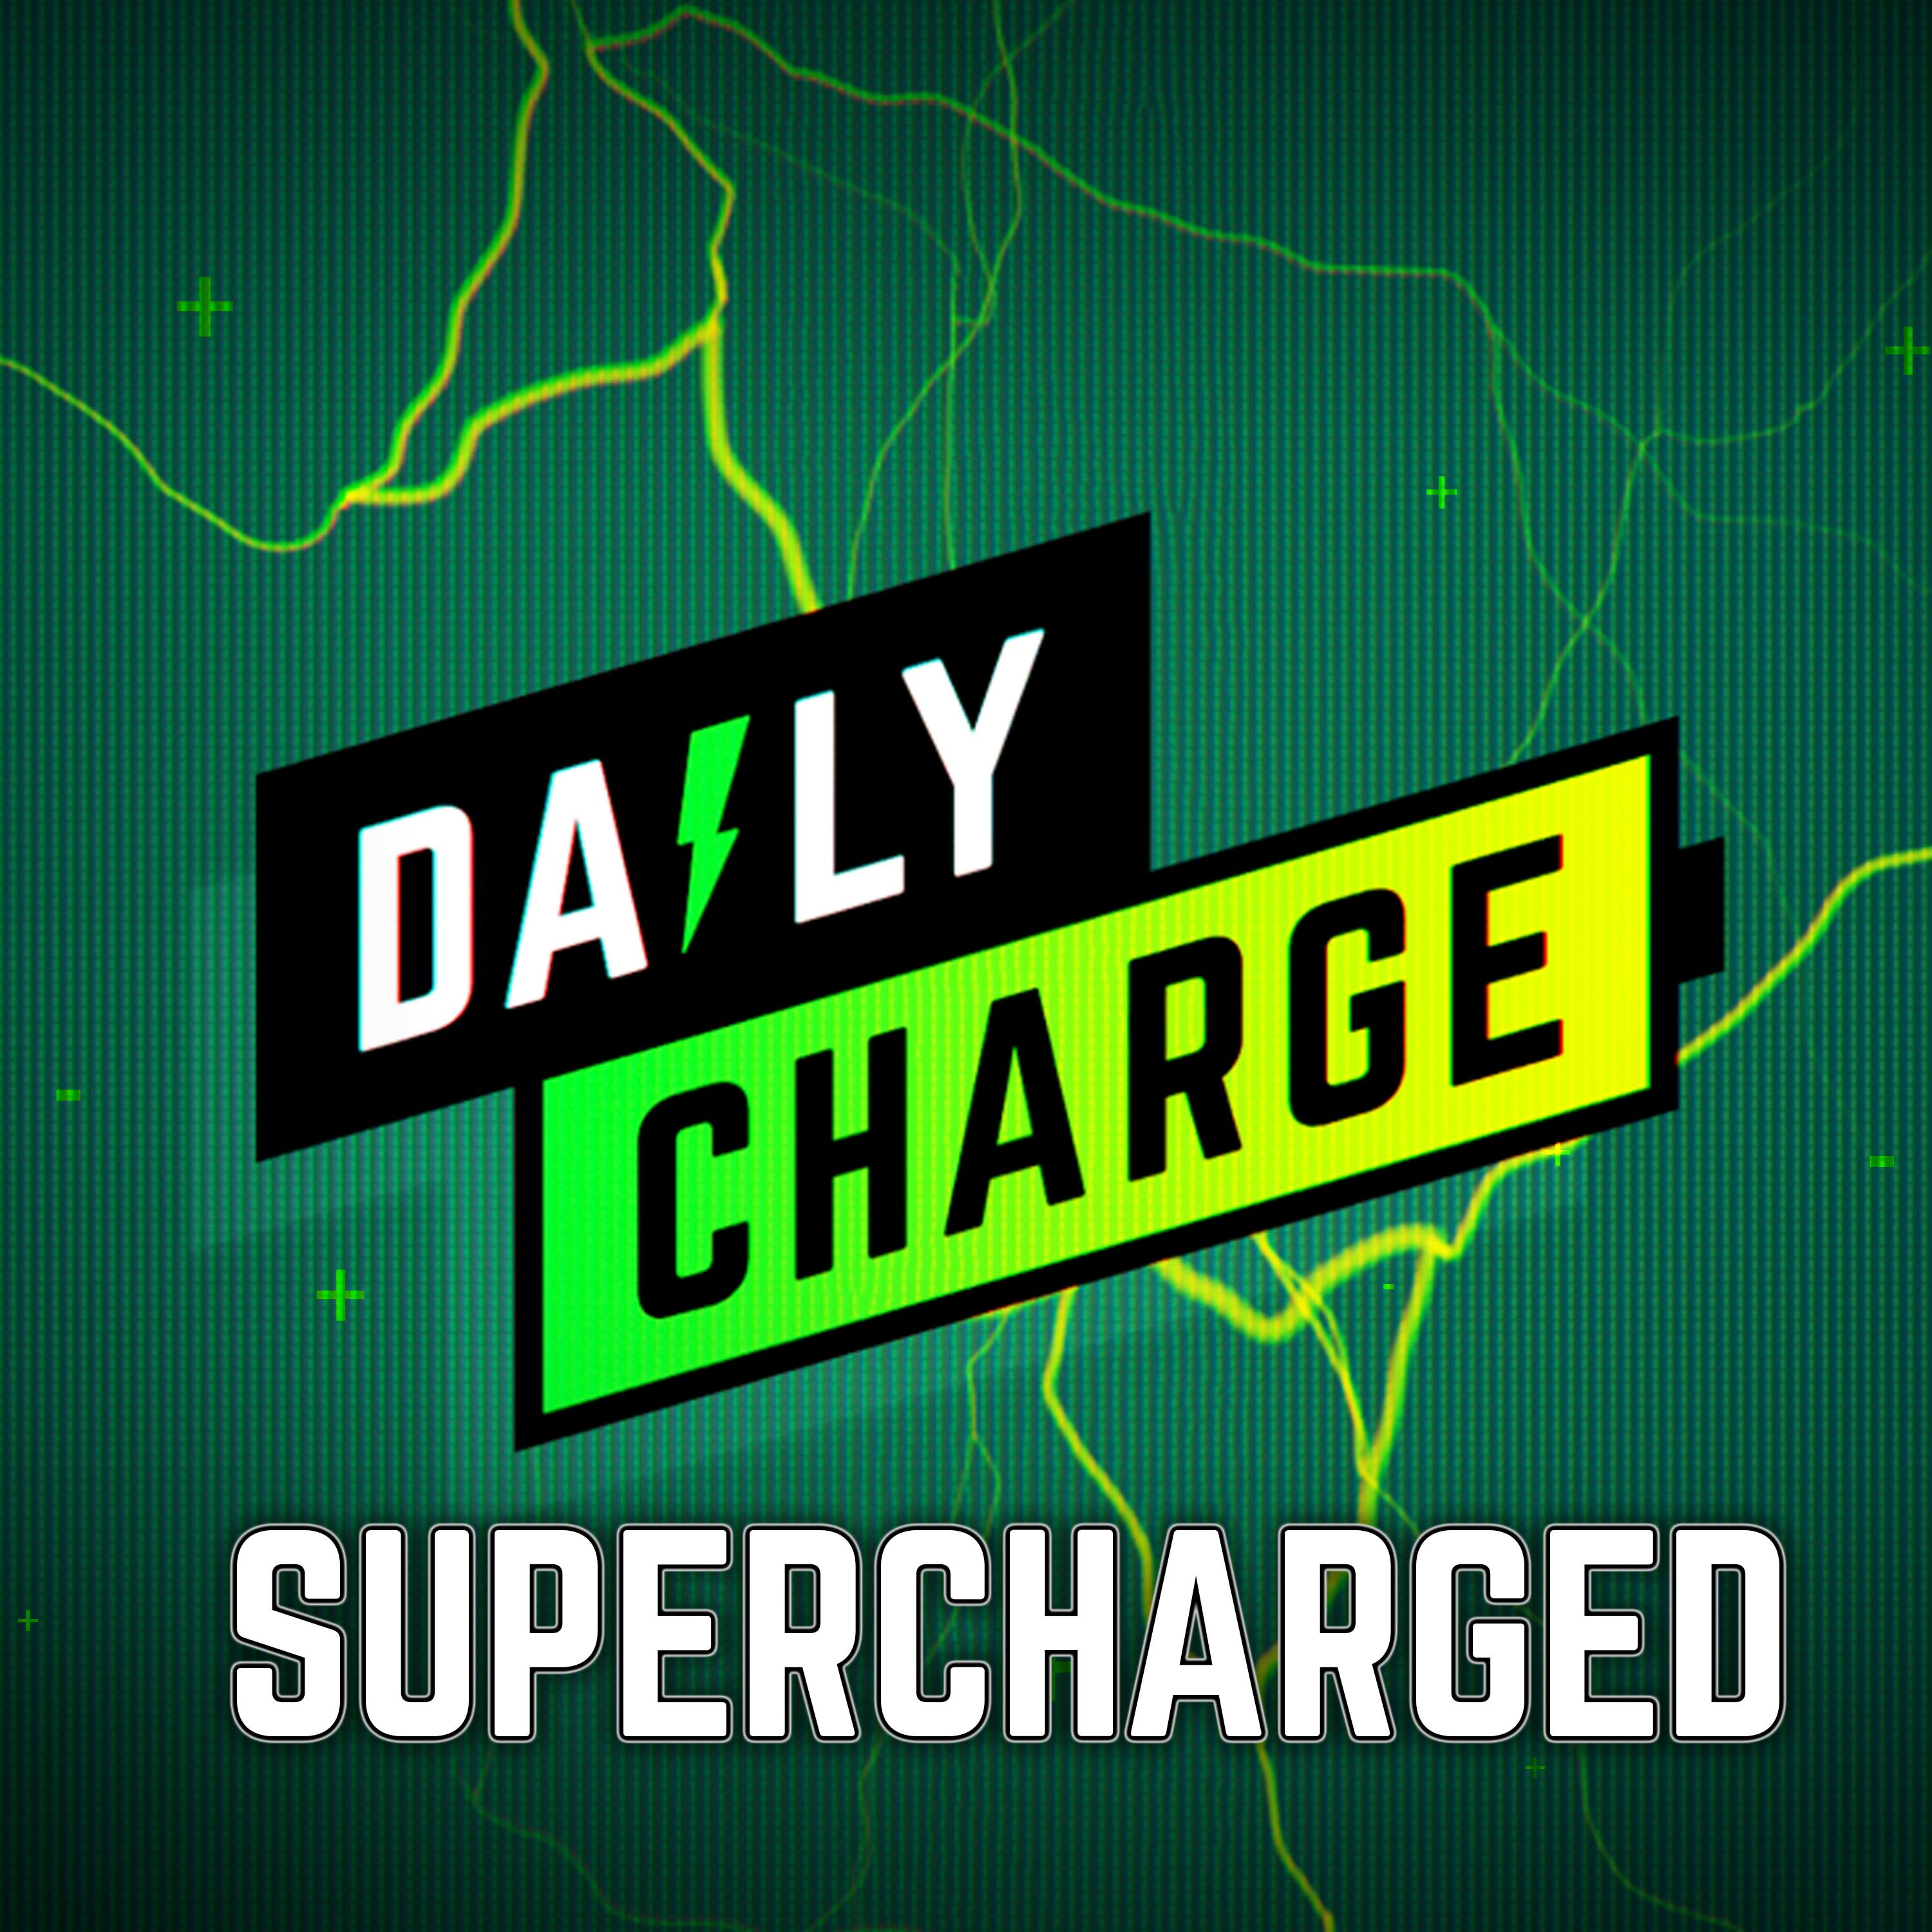 What is next for Iger, Chapek and Disney? (The Daily SUPERCharge, 2/26/2020)